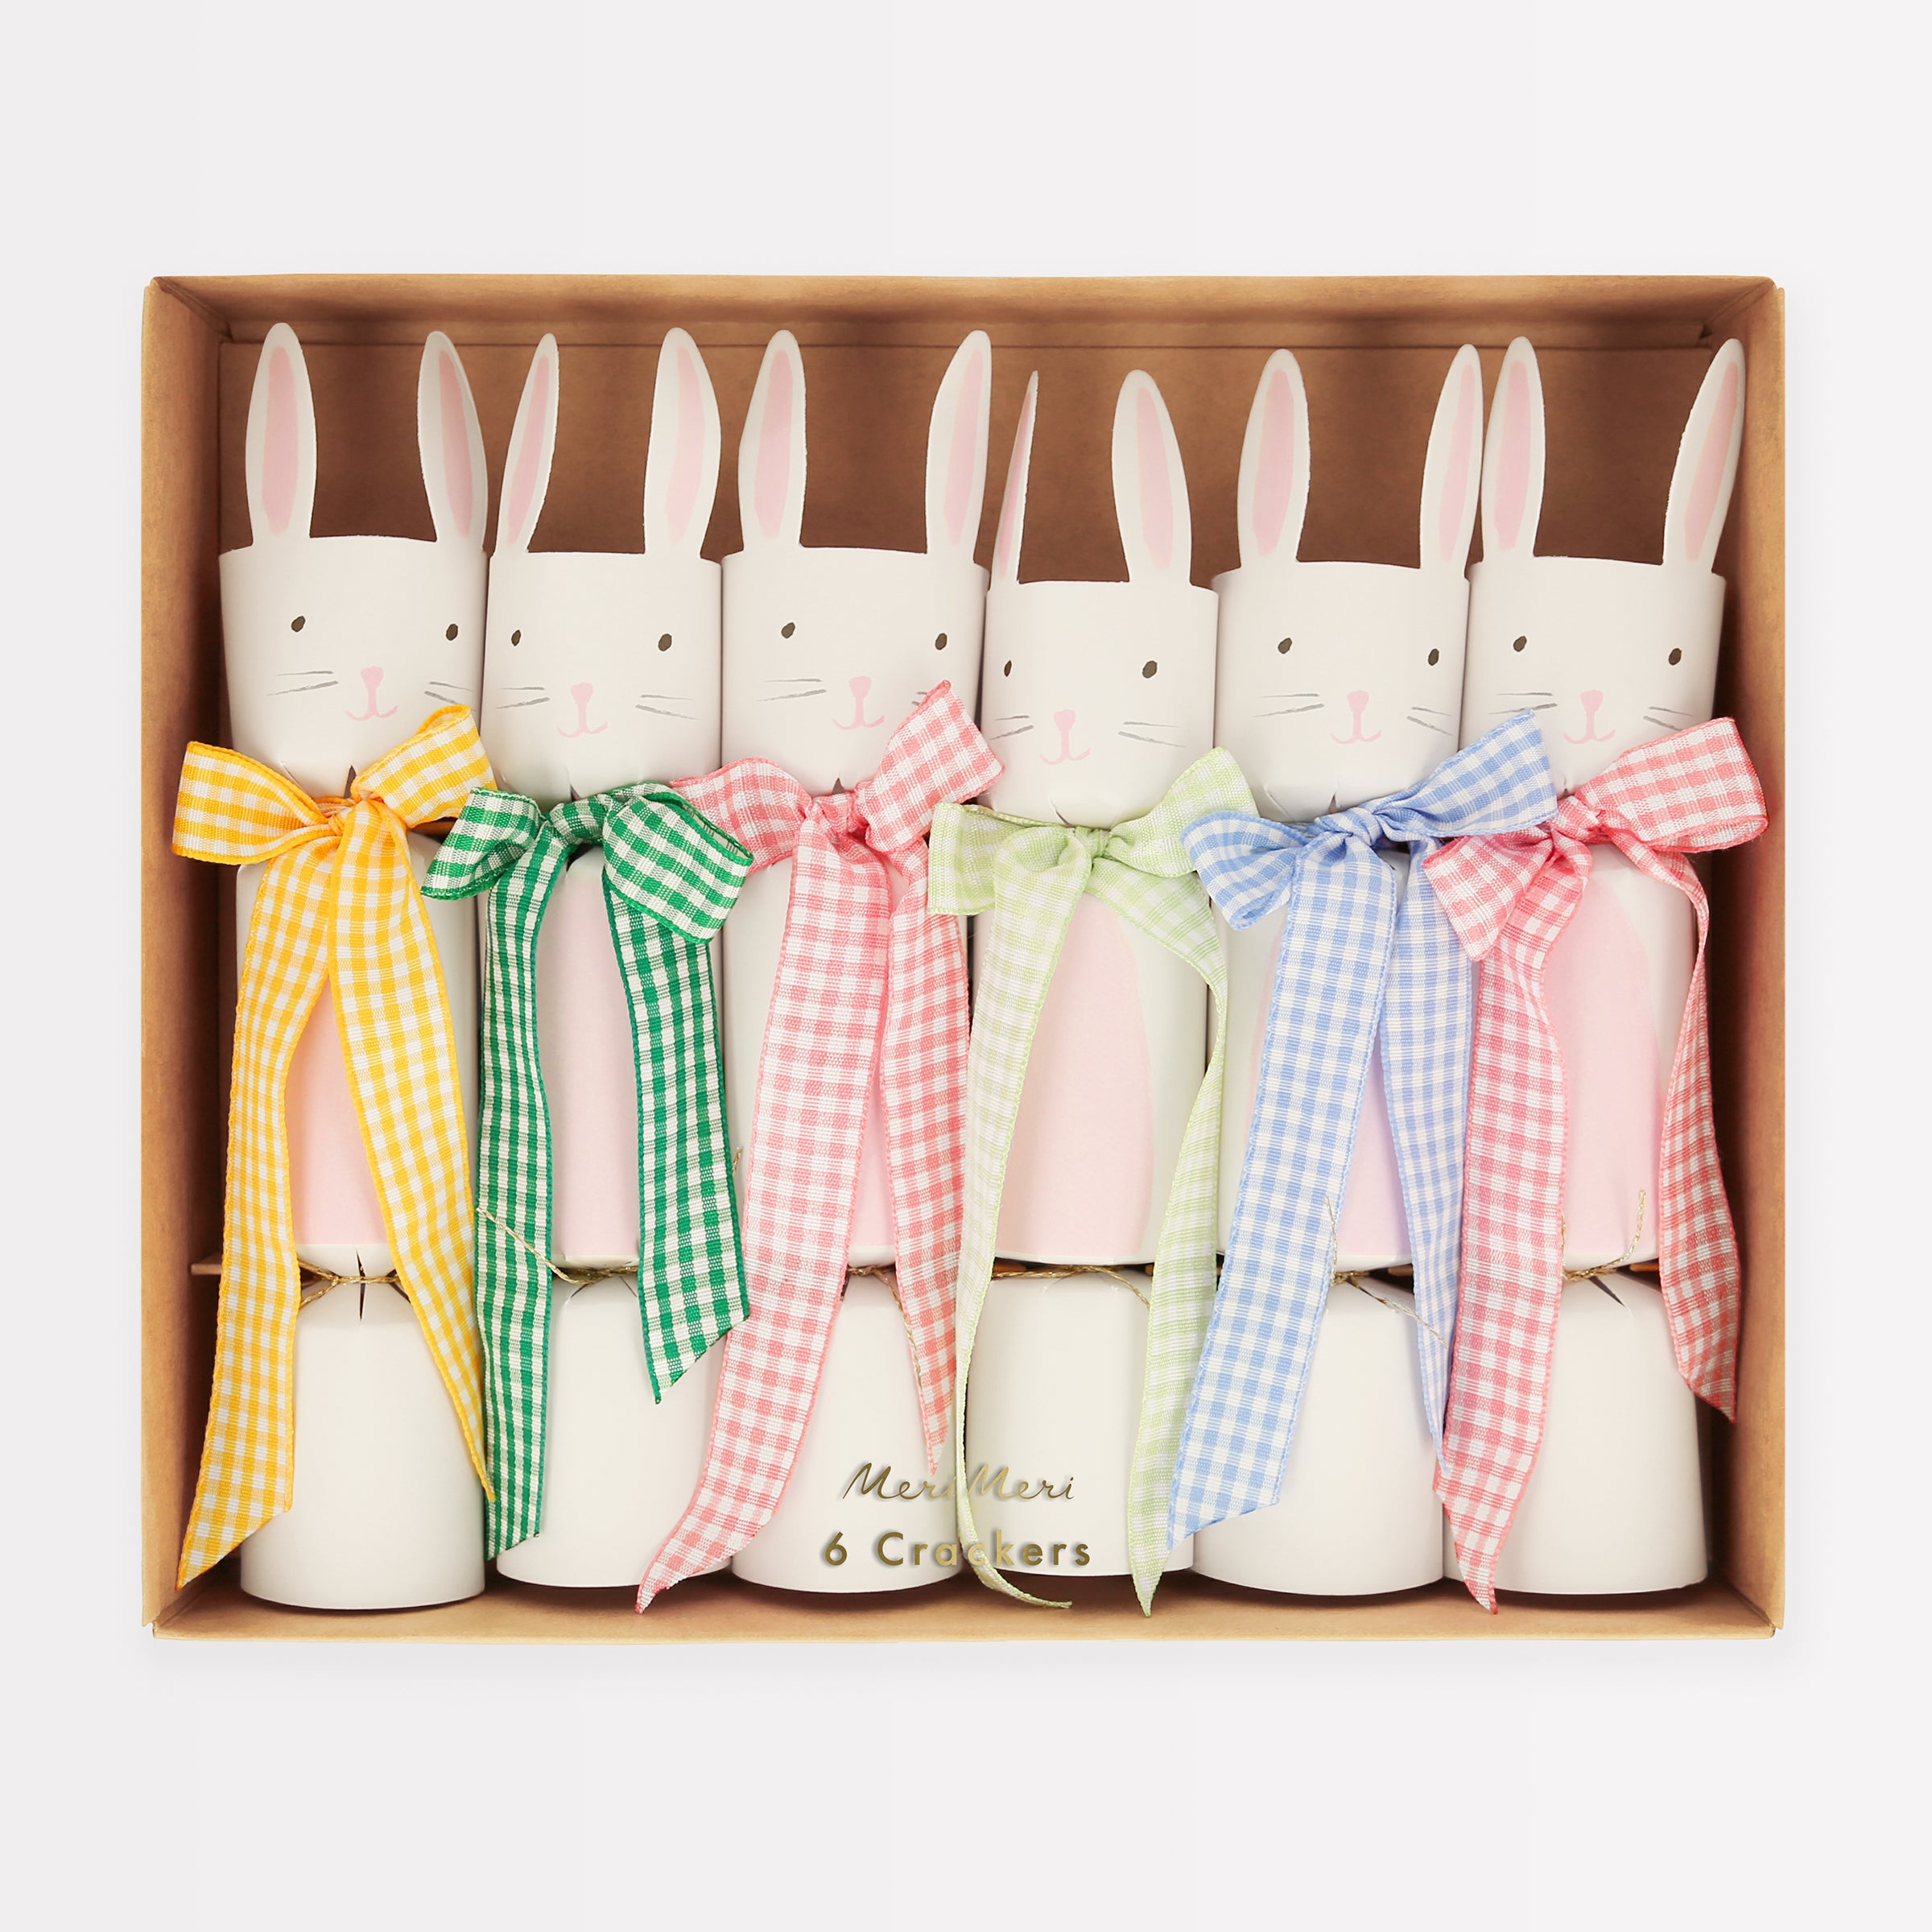 Our party crackers are crafted in the shape of bunnies, and contain mint tissue paper hats, erasers and a joke.